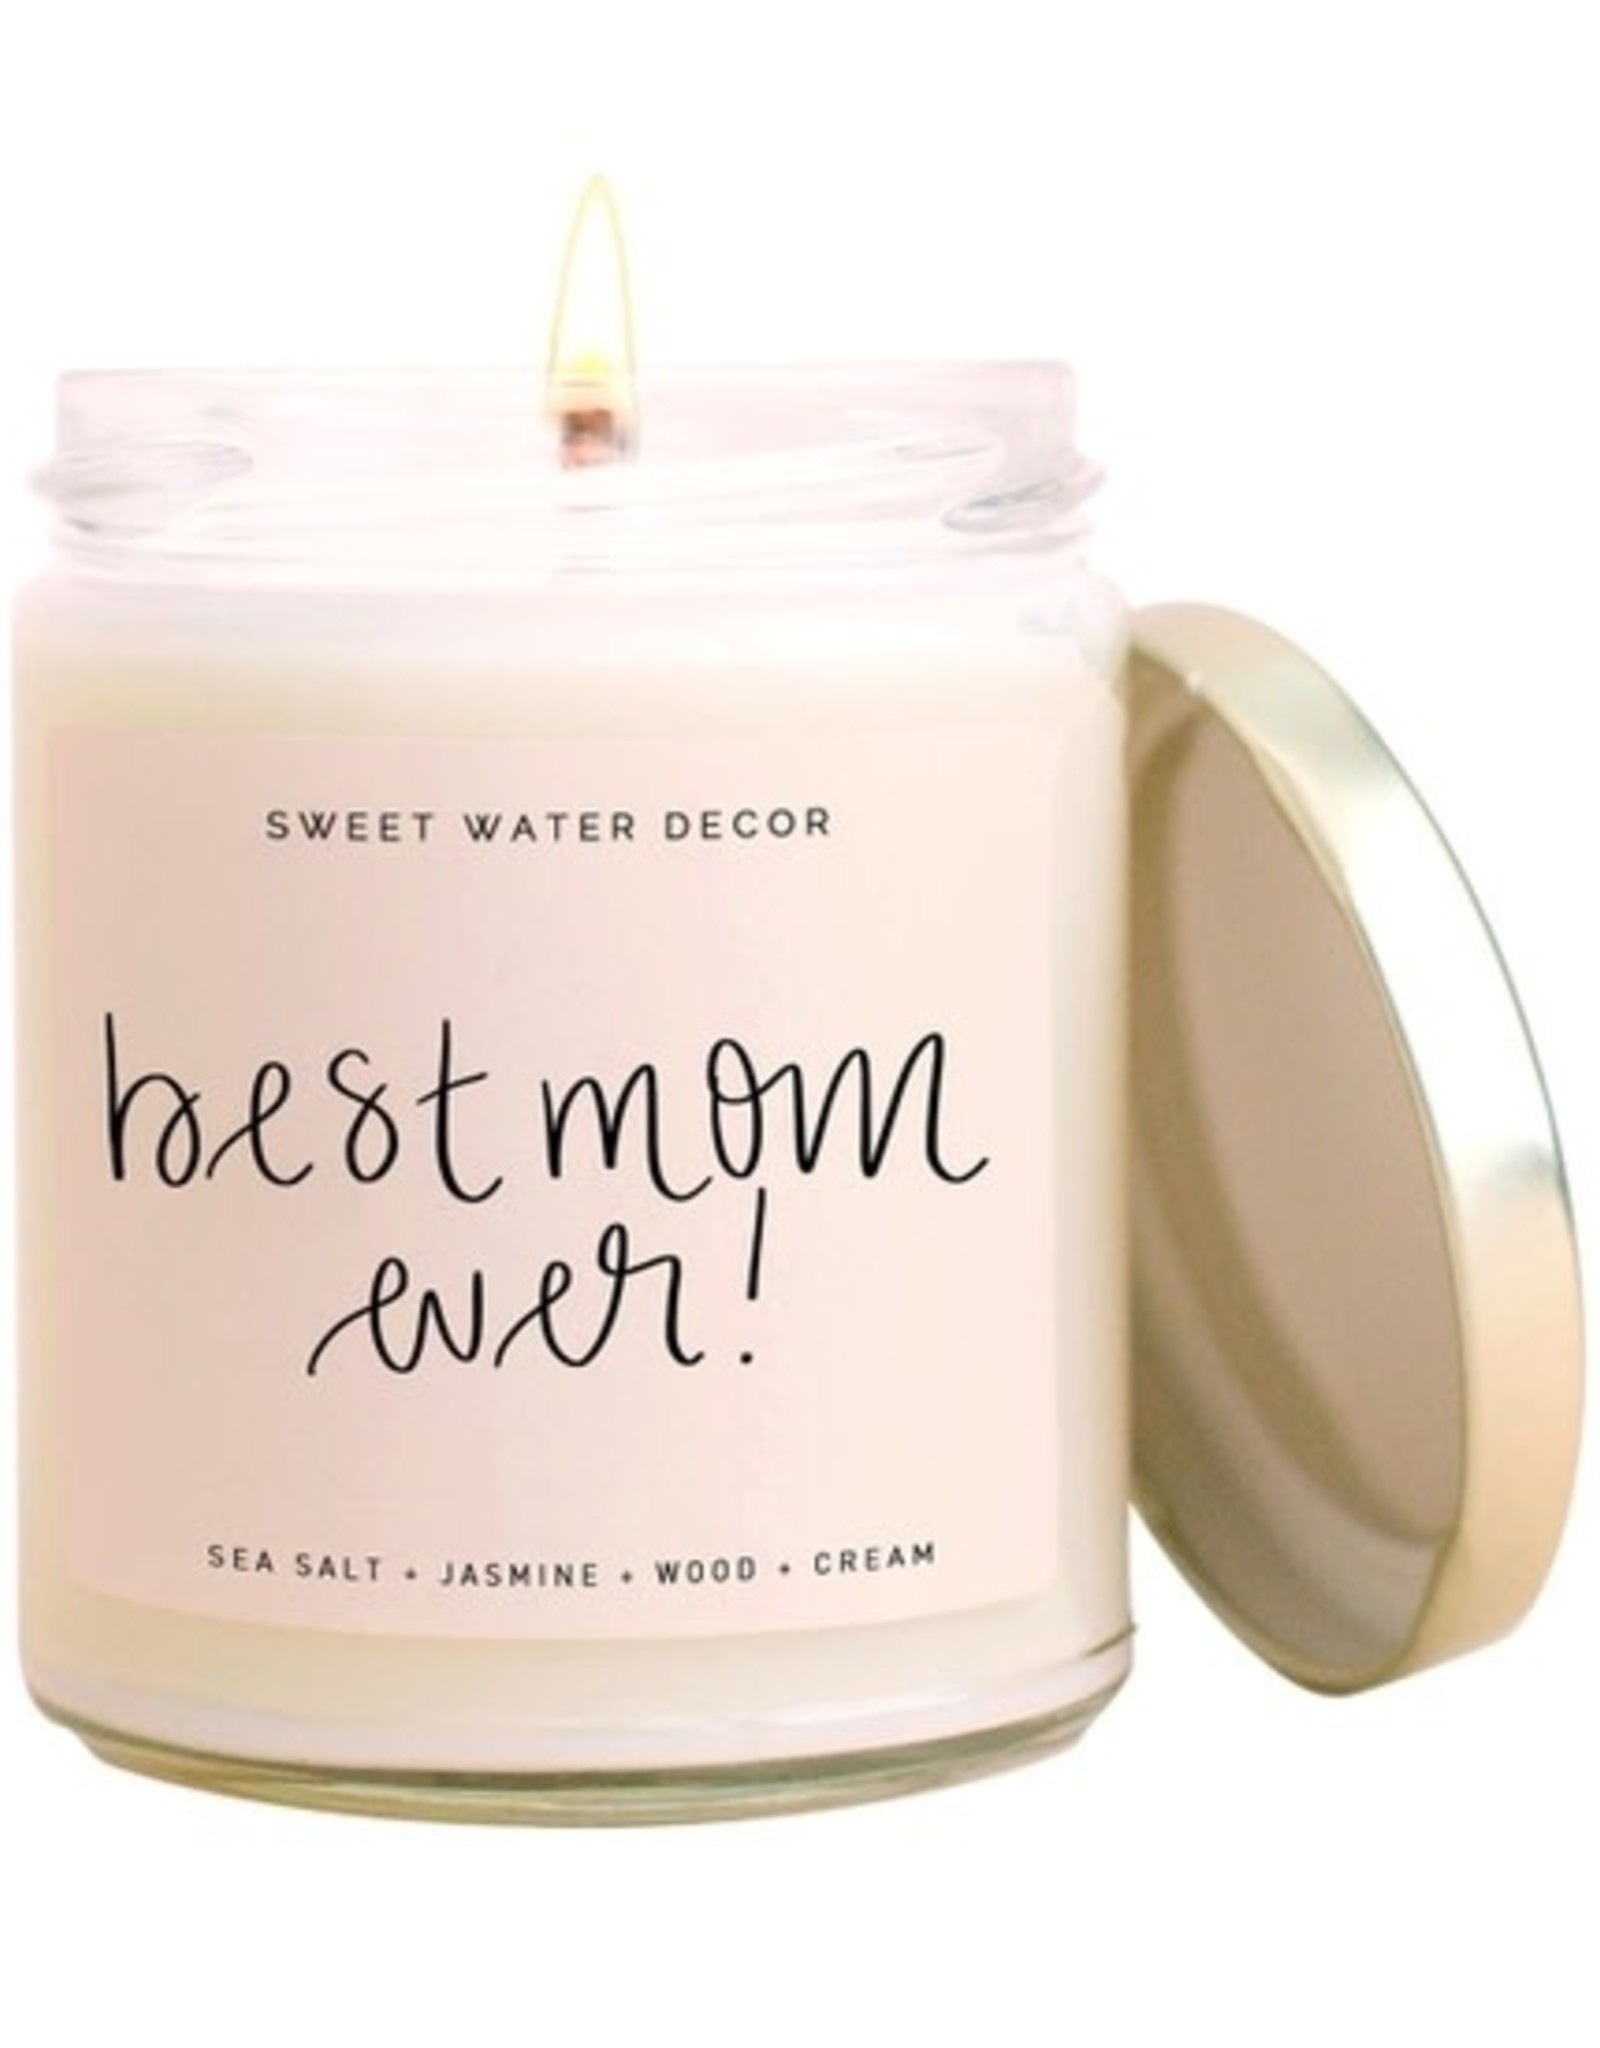 Sweet Water Decor Best Mom Ever! Soy Candle